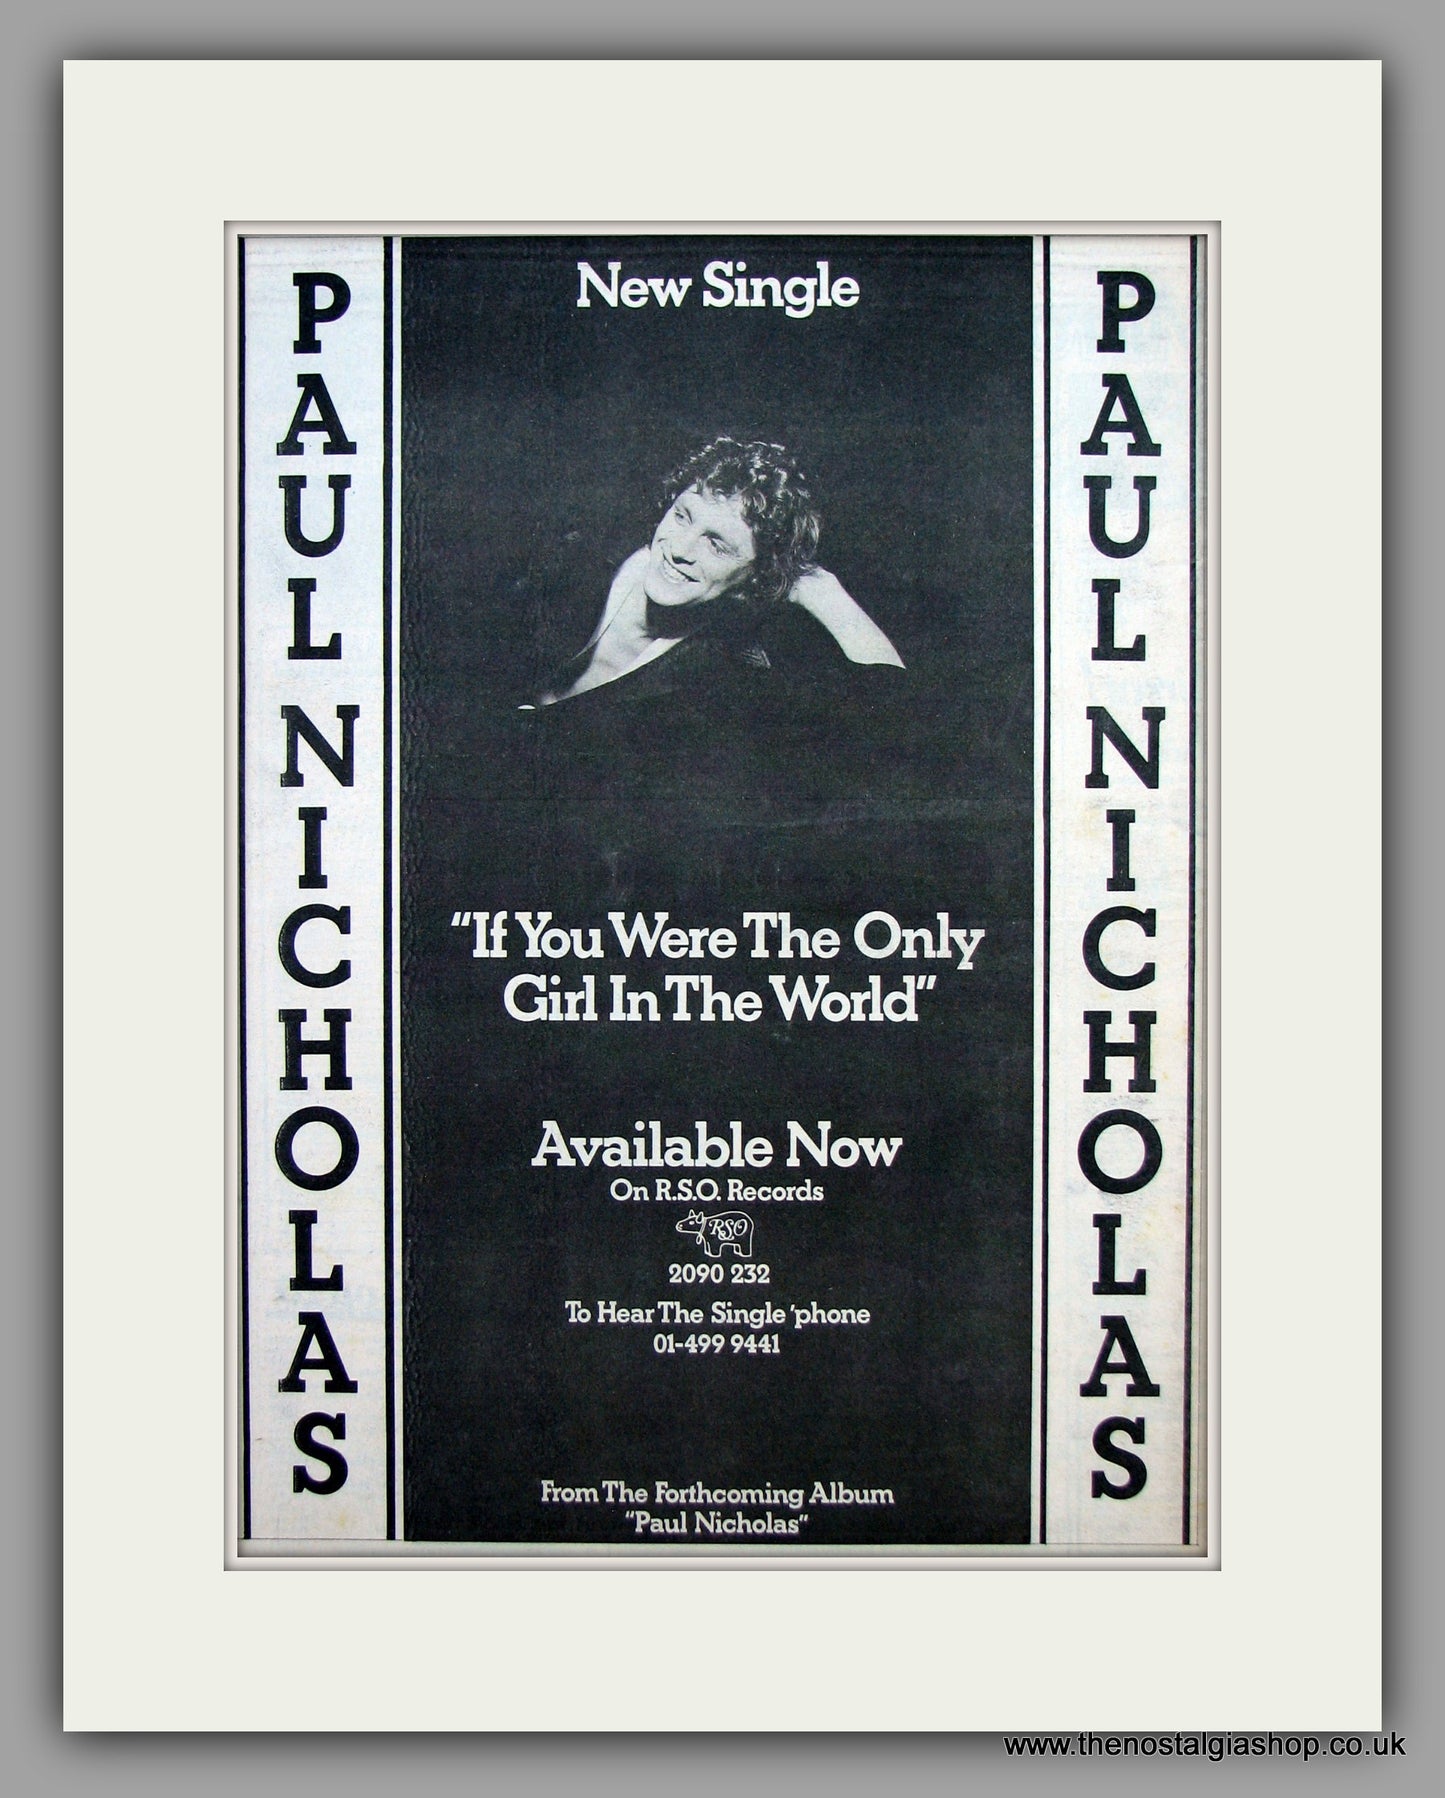 Paul Nicholas, If You Were The Only Girl In The World. Original Vintage Advert 1977 (ref AD10457)